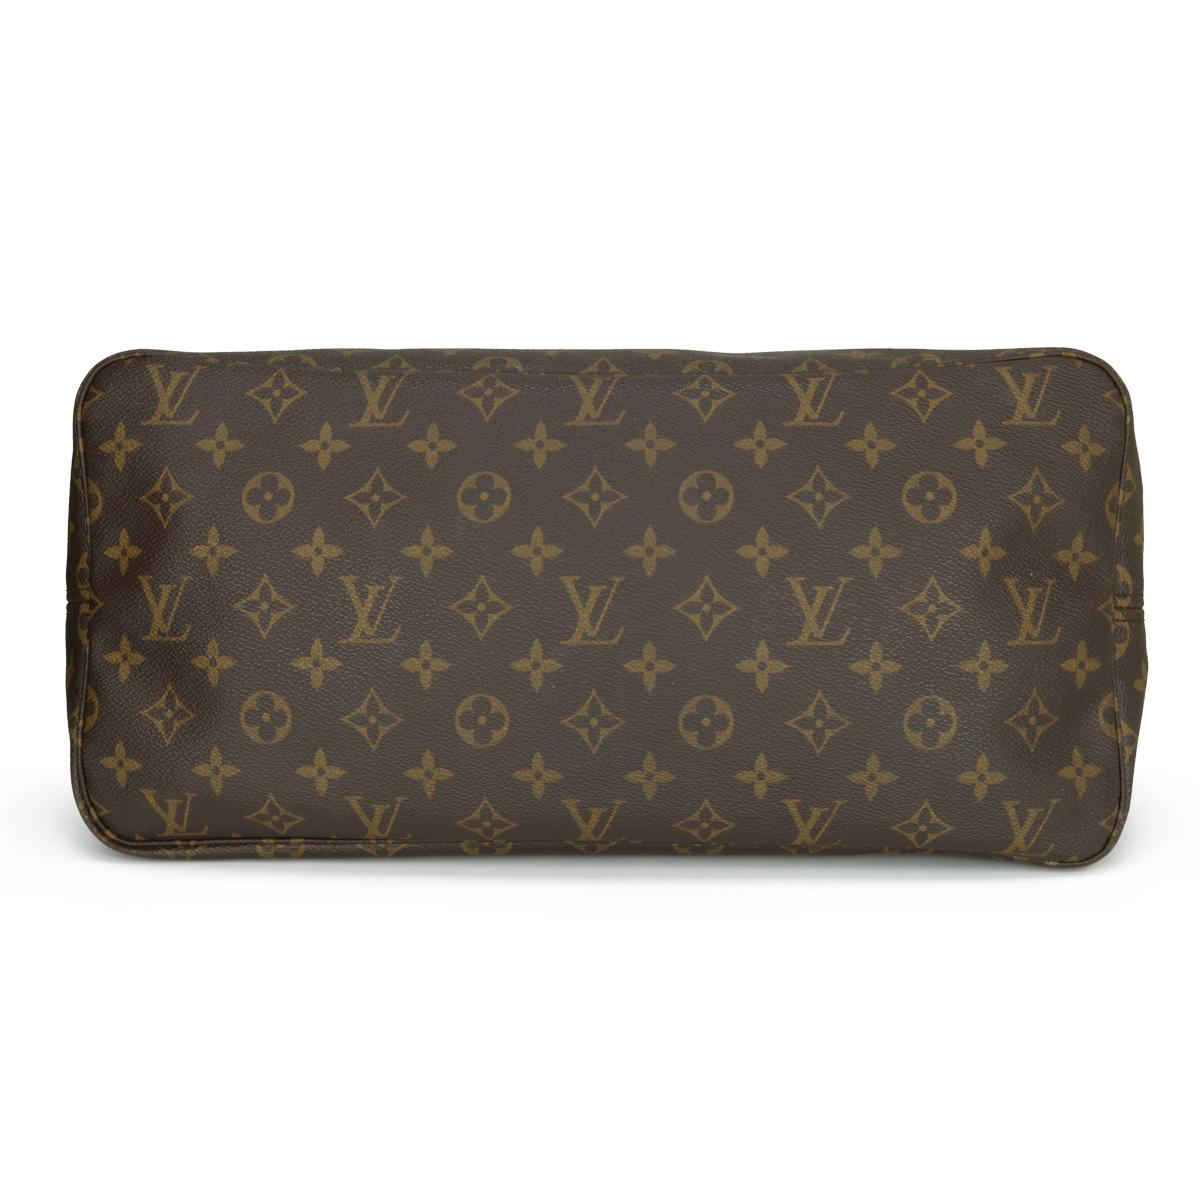 Louis Vuitton Neverfull GM Bag in Monogram with Beige Interior 2008 3